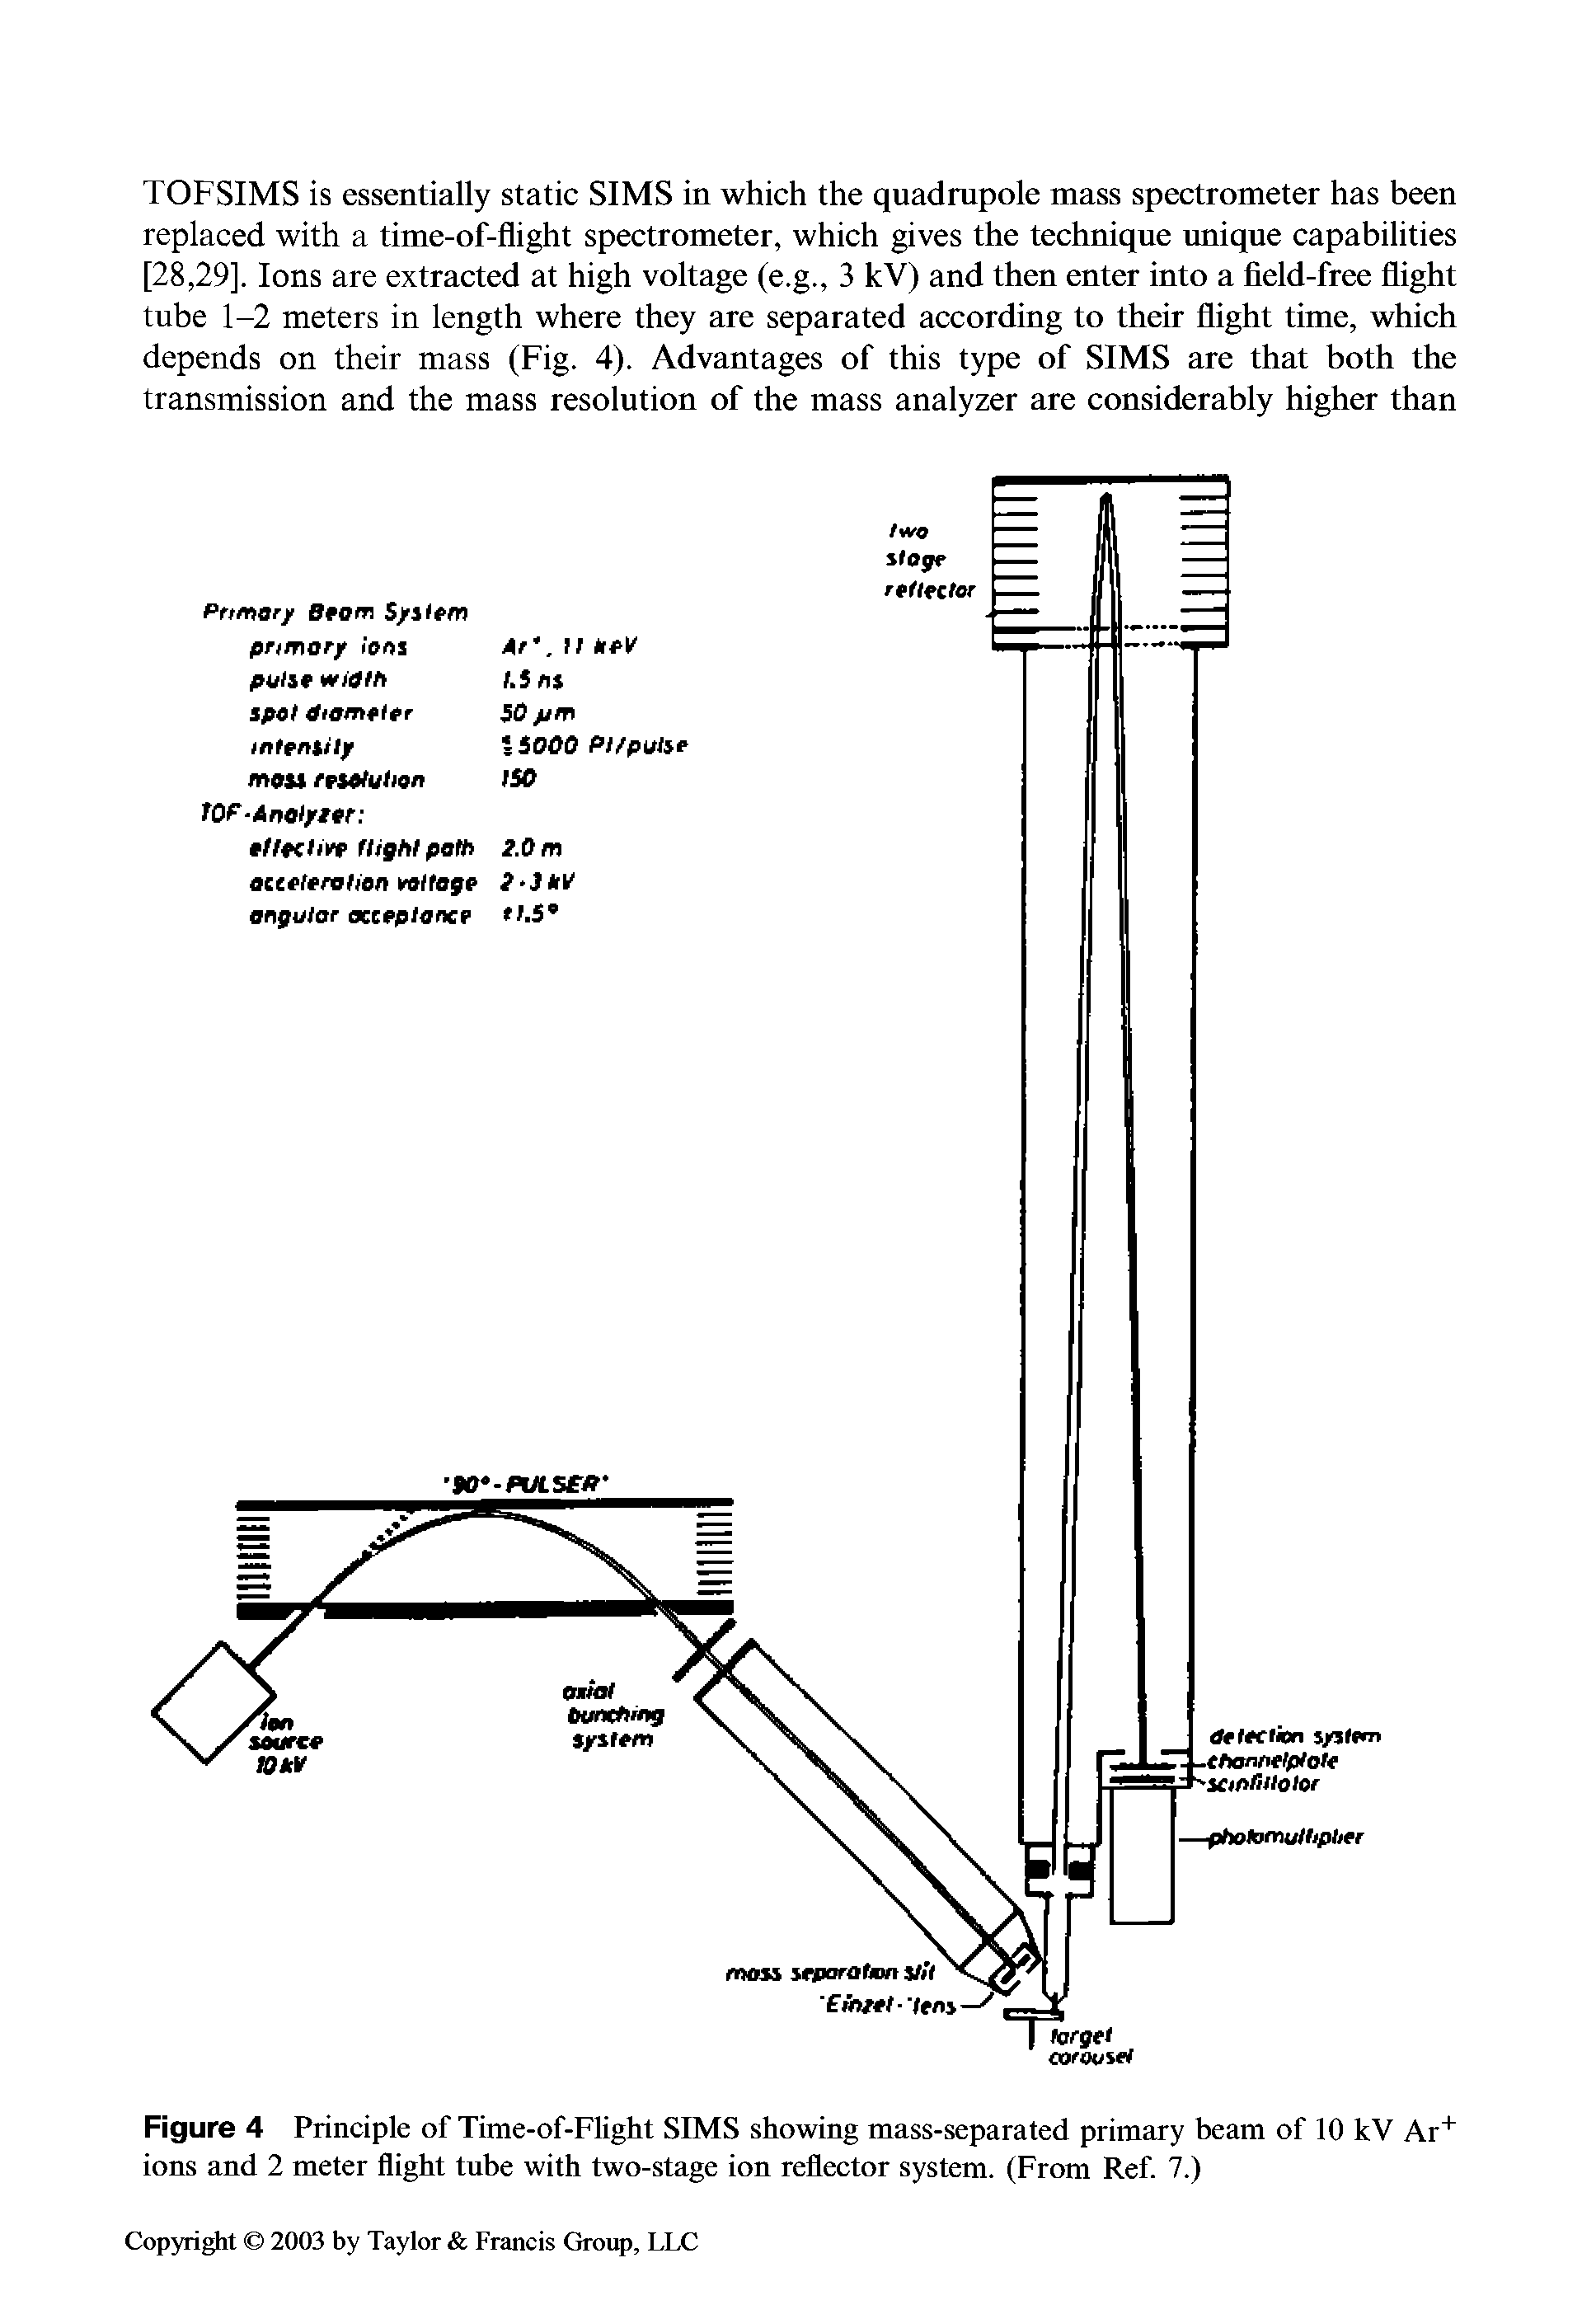 Figure 4 Principle of Time-of-Flight SIMS showing mass-separated primary beam of 10 kV Ar ions and 2 meter flight tube with two-stage ion reflector system. (From Ref. 7.)...